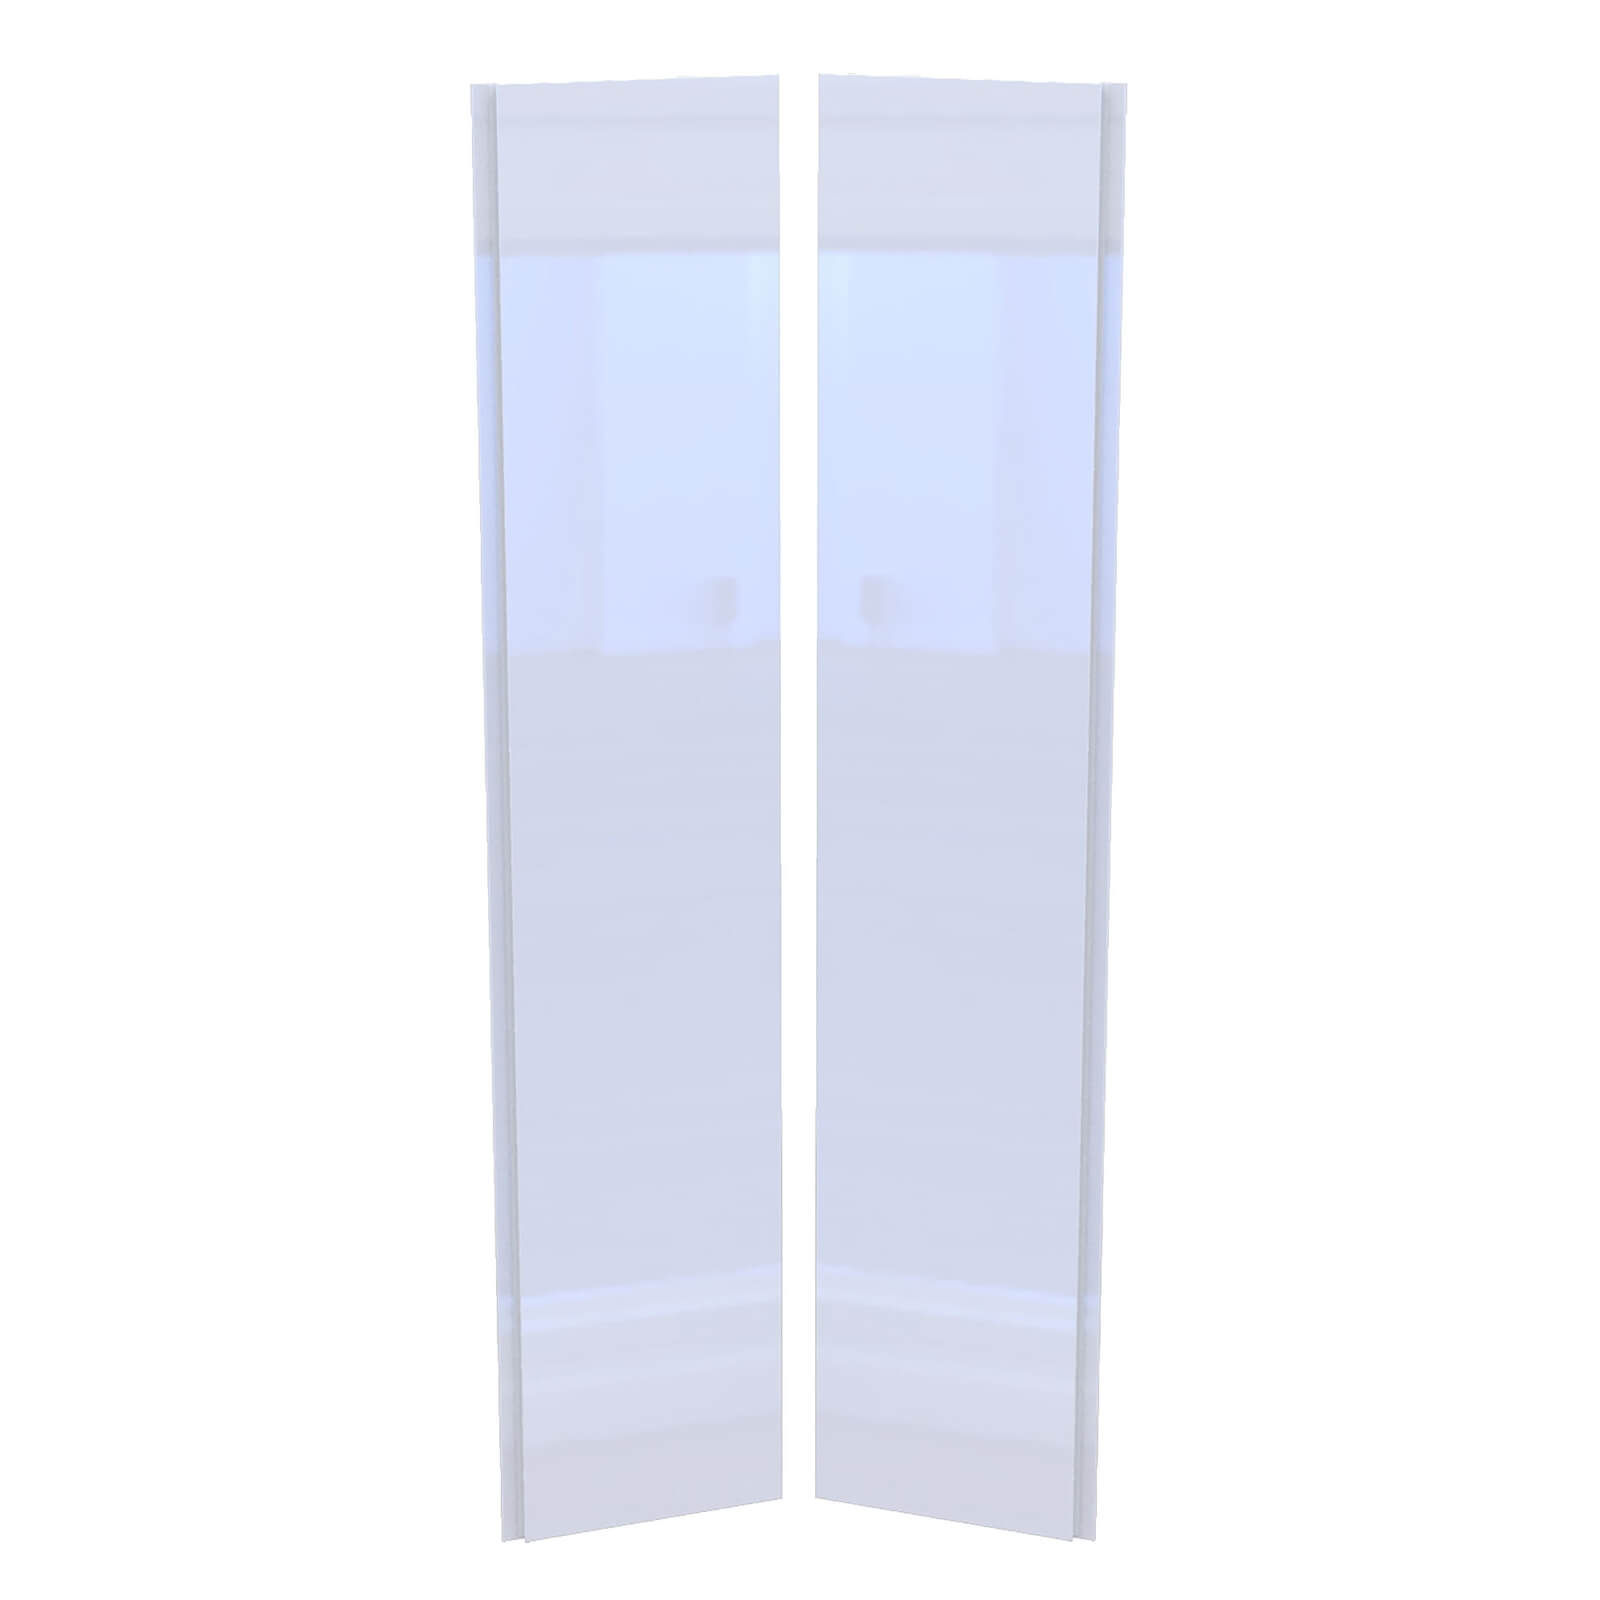 Fitted Bedroom Handleless Double Wardrobe Doors - White